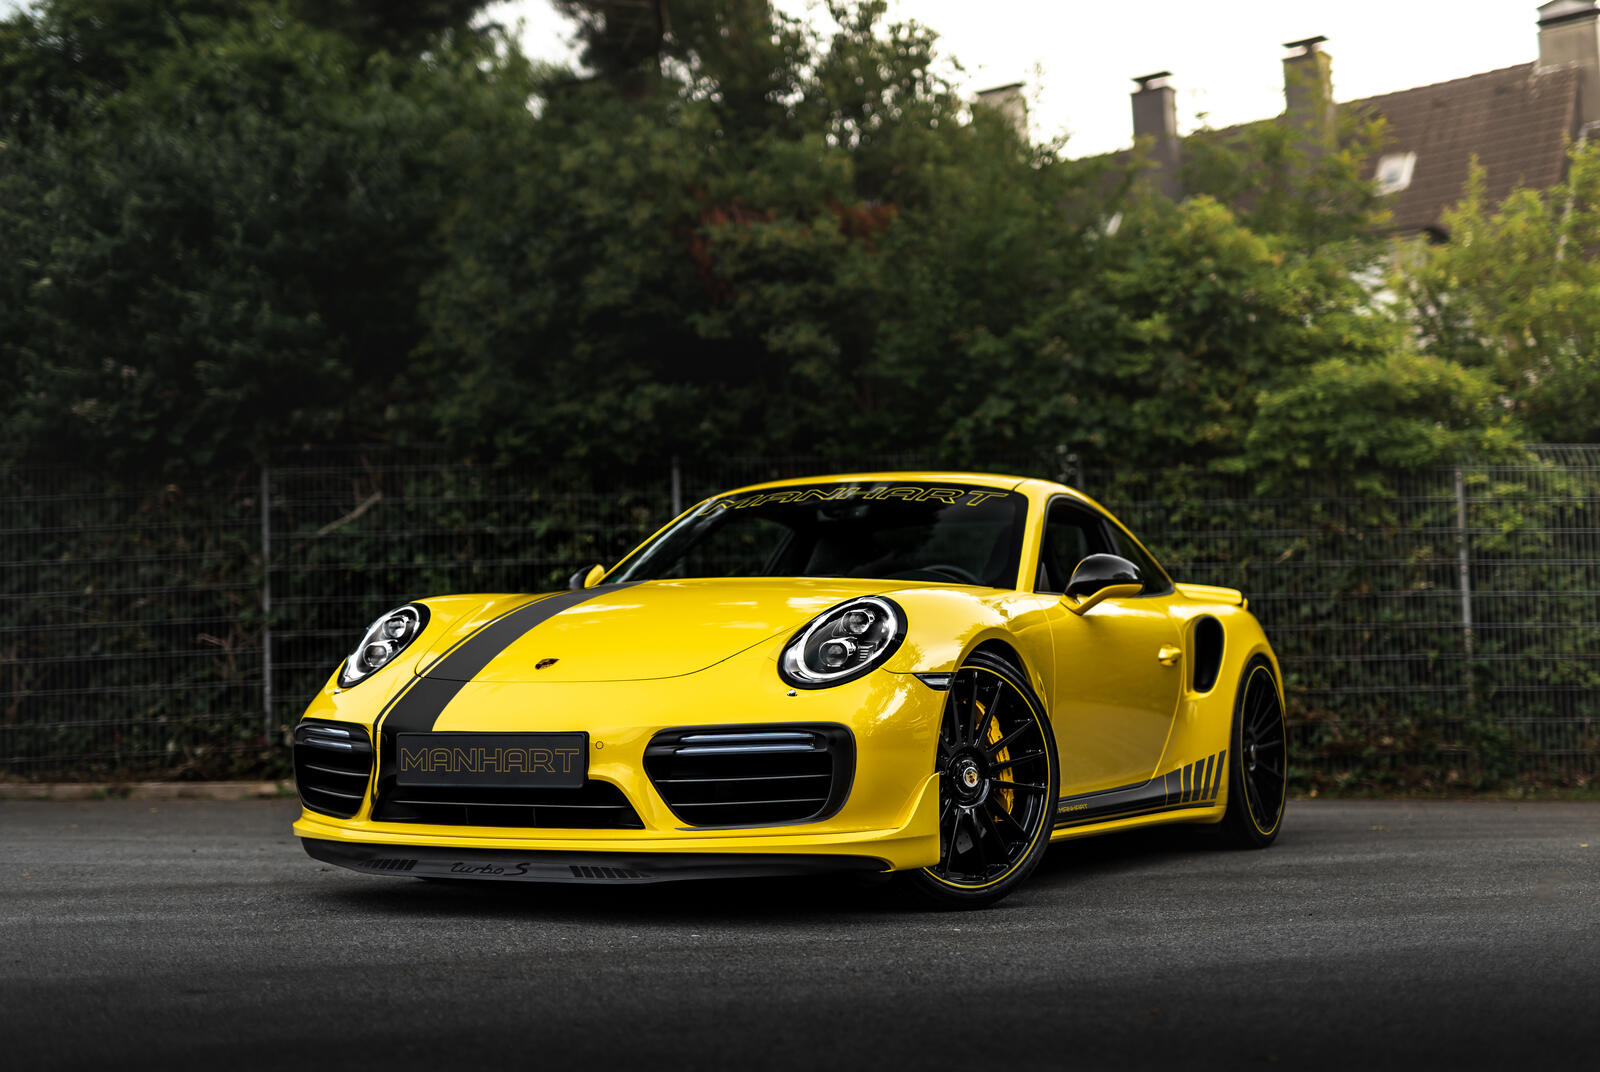 Wallpapers Porsche 911 yellow car view from front on the desktop